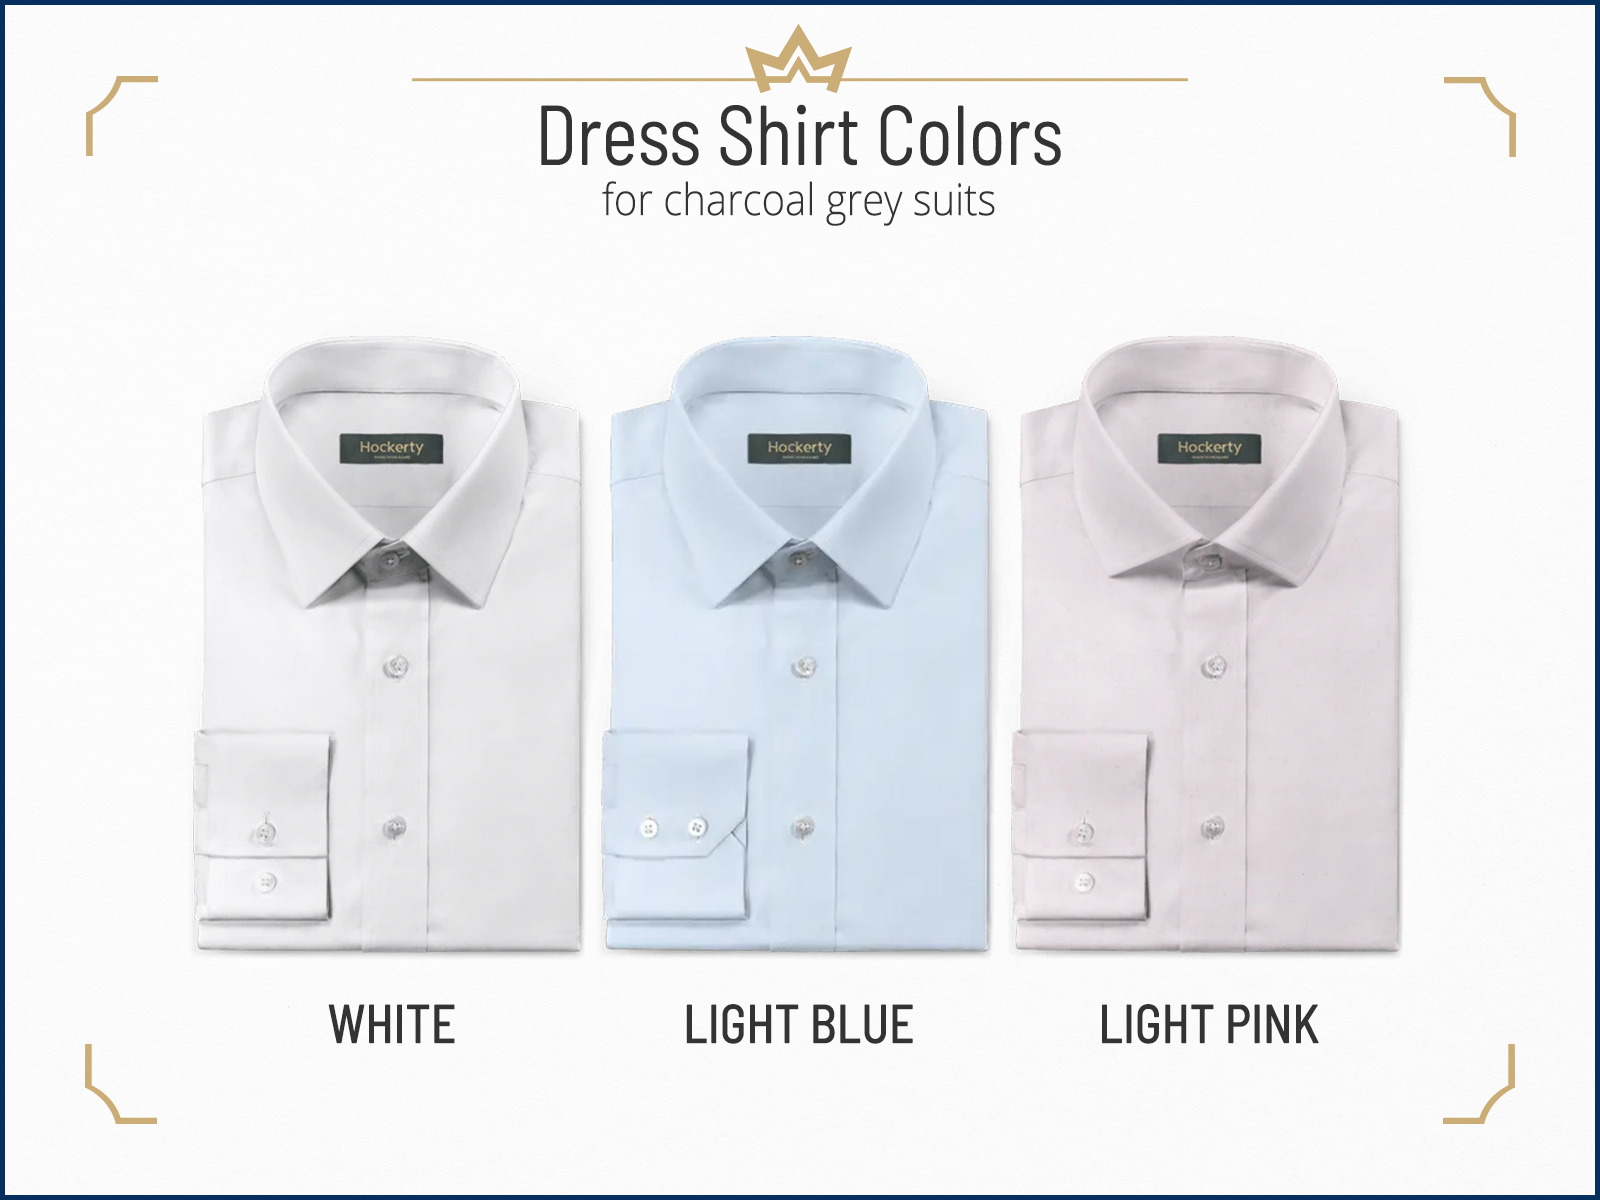 Recommended dress shirt colors for a charcoal suit